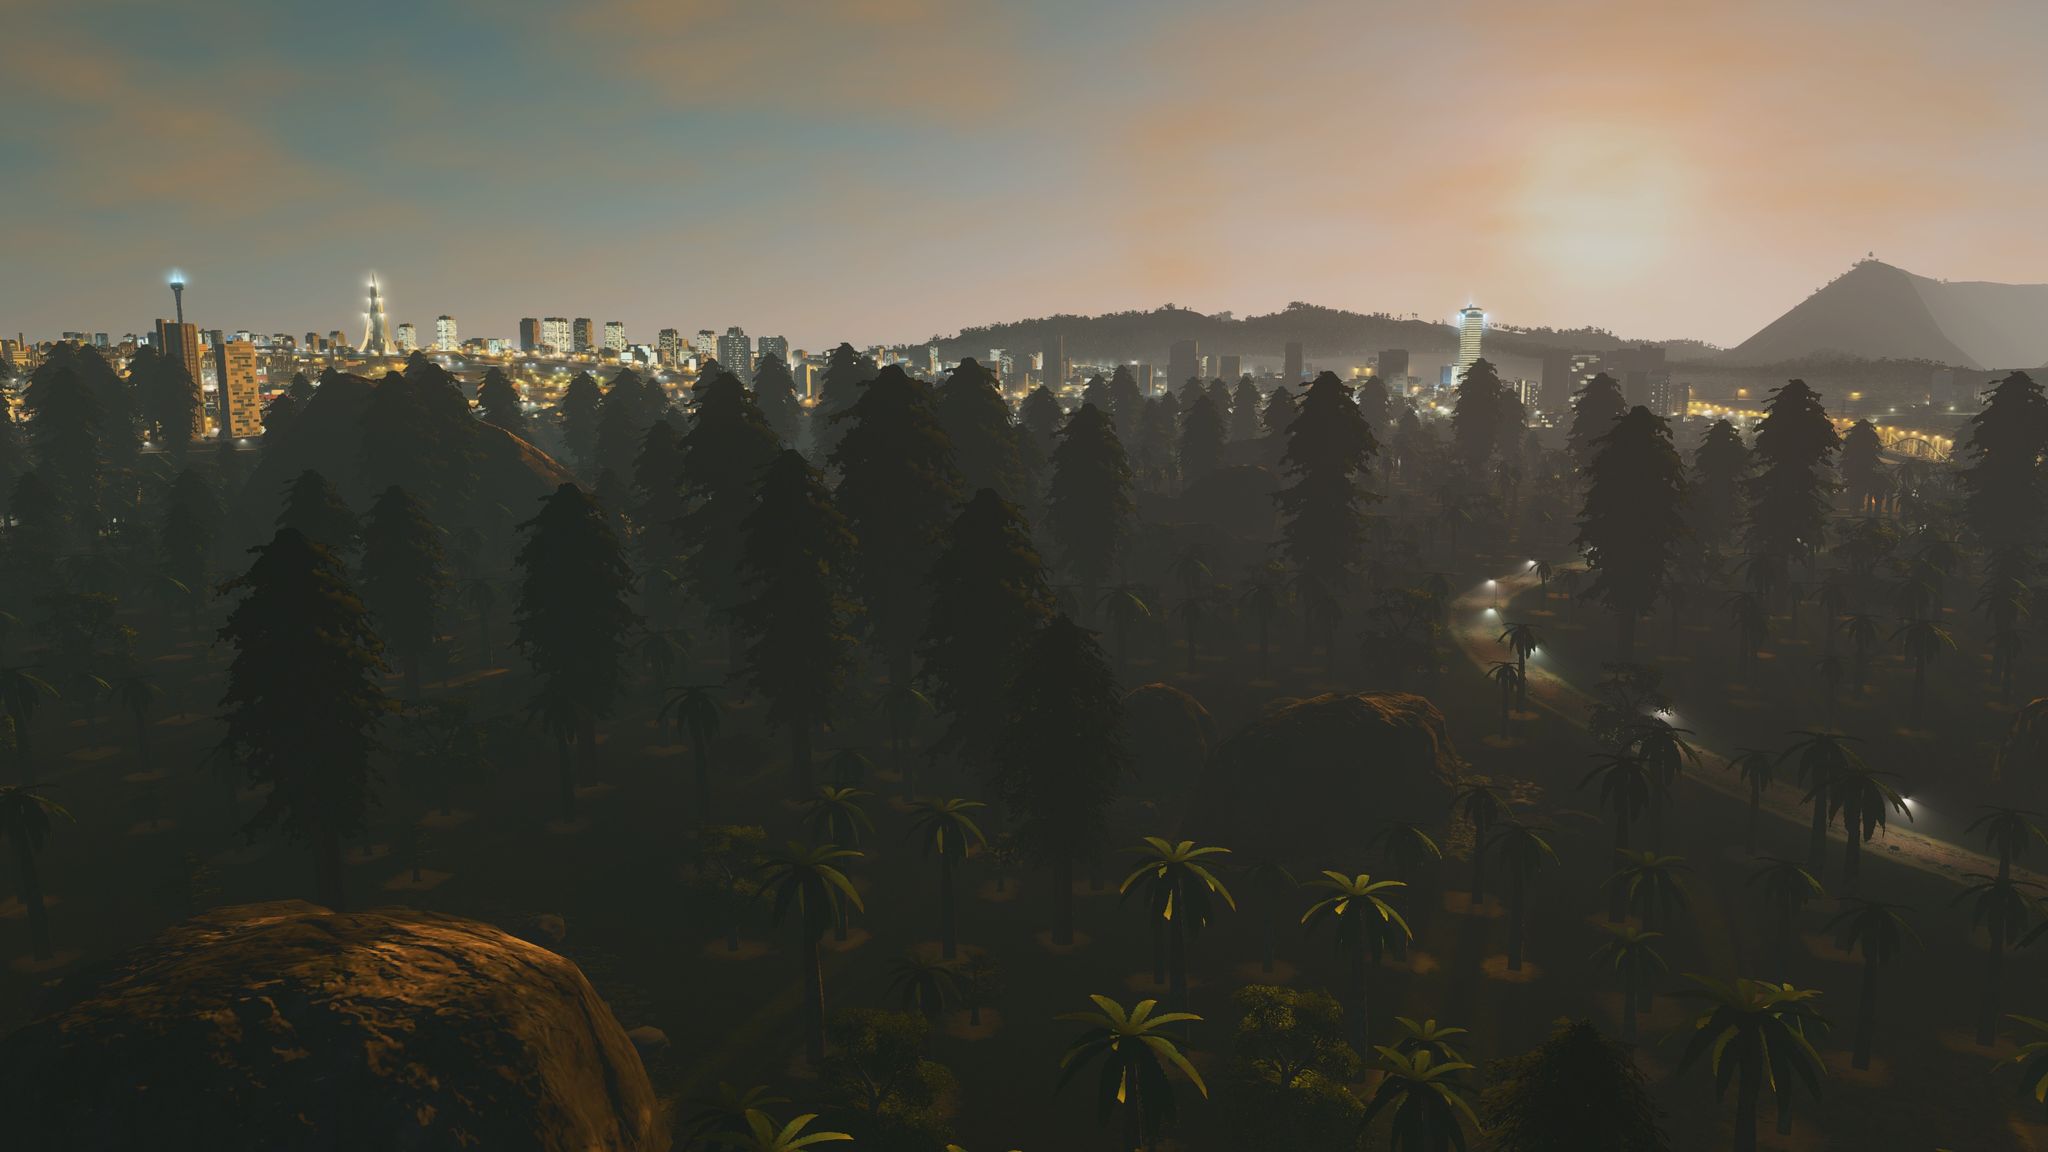 A screenshot from the game Cities: Skylines, the sun is just above the horizon, in the foreground is a forest of giant redwood trees partially covered in mist, and modern buildings are just visible over the tops of the trees.